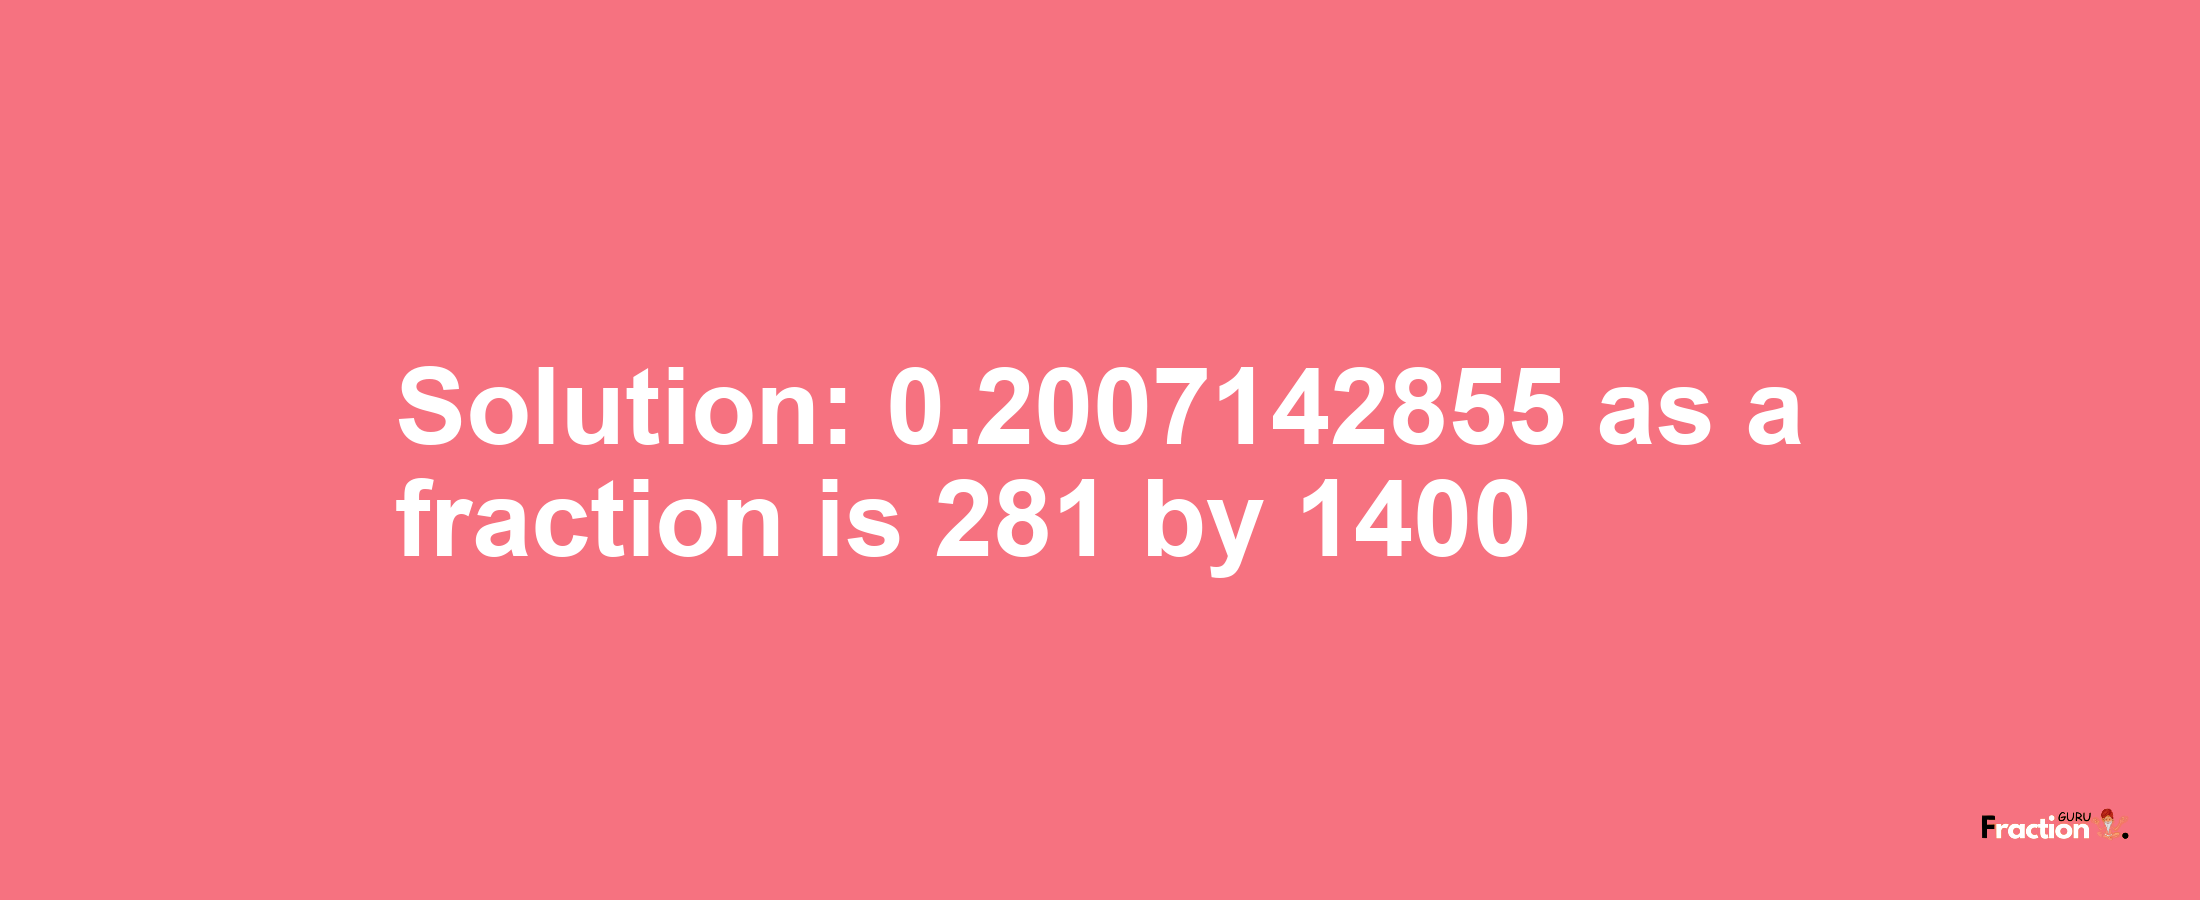 Solution:0.2007142855 as a fraction is 281/1400